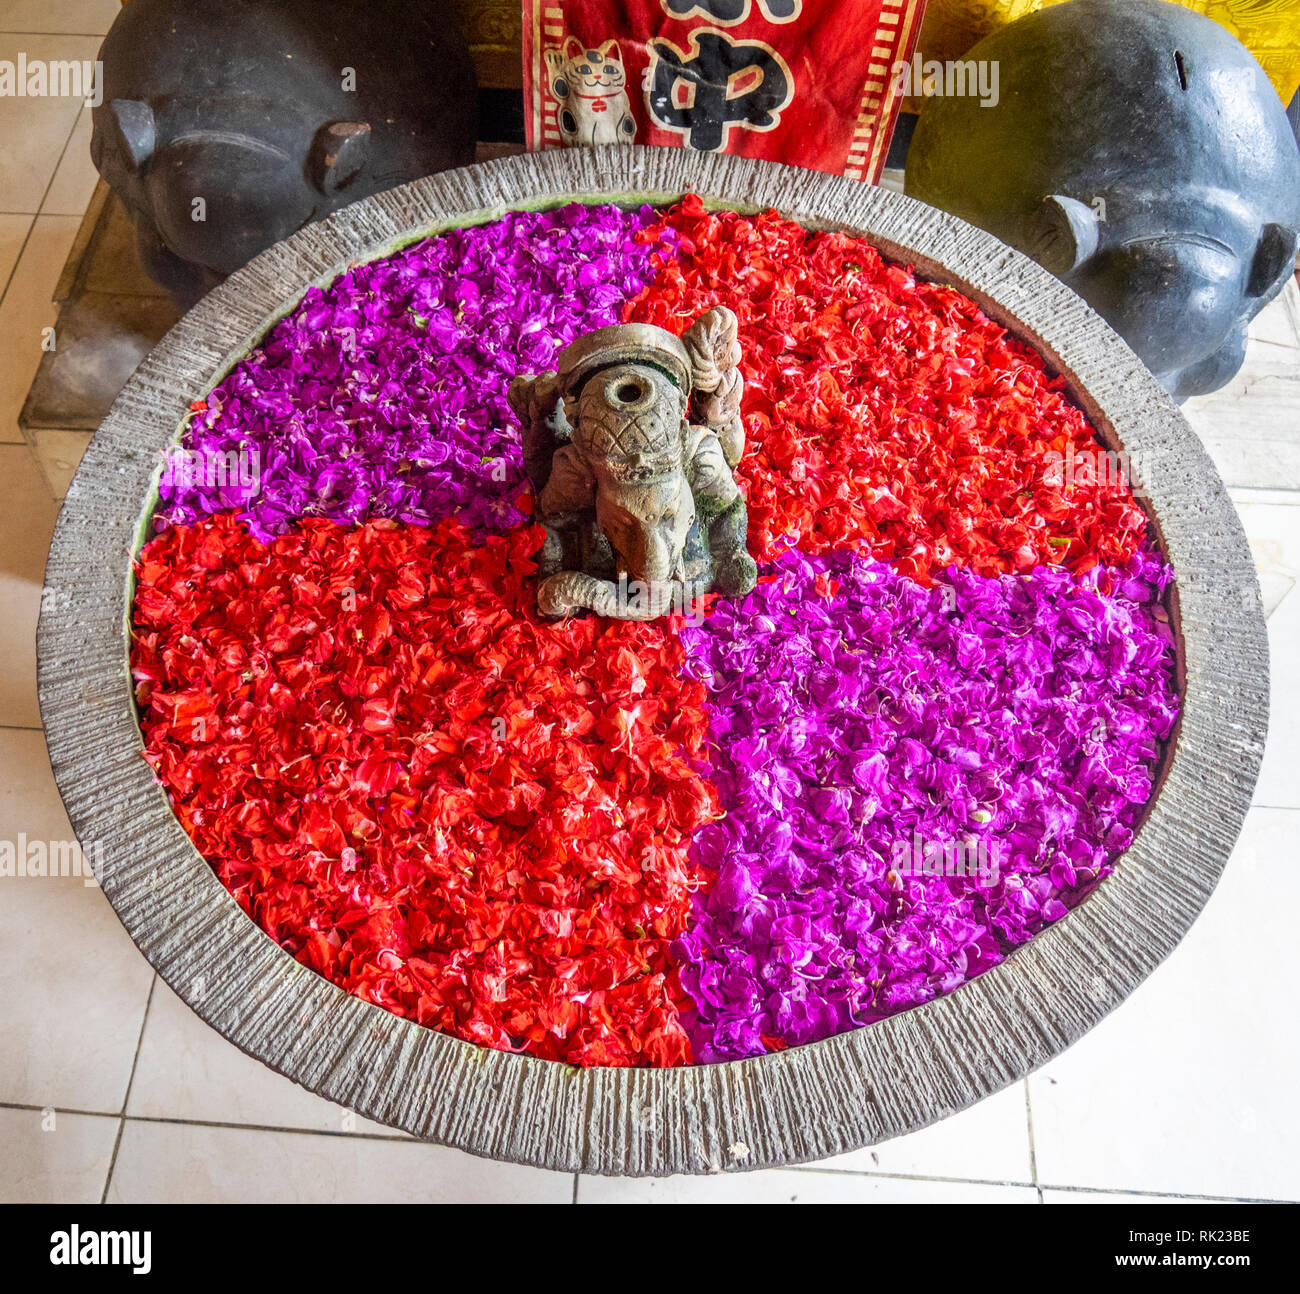 An urn filled with red and magenta flower petals in Jimbaran, Bali Indonesia. Stock Photo